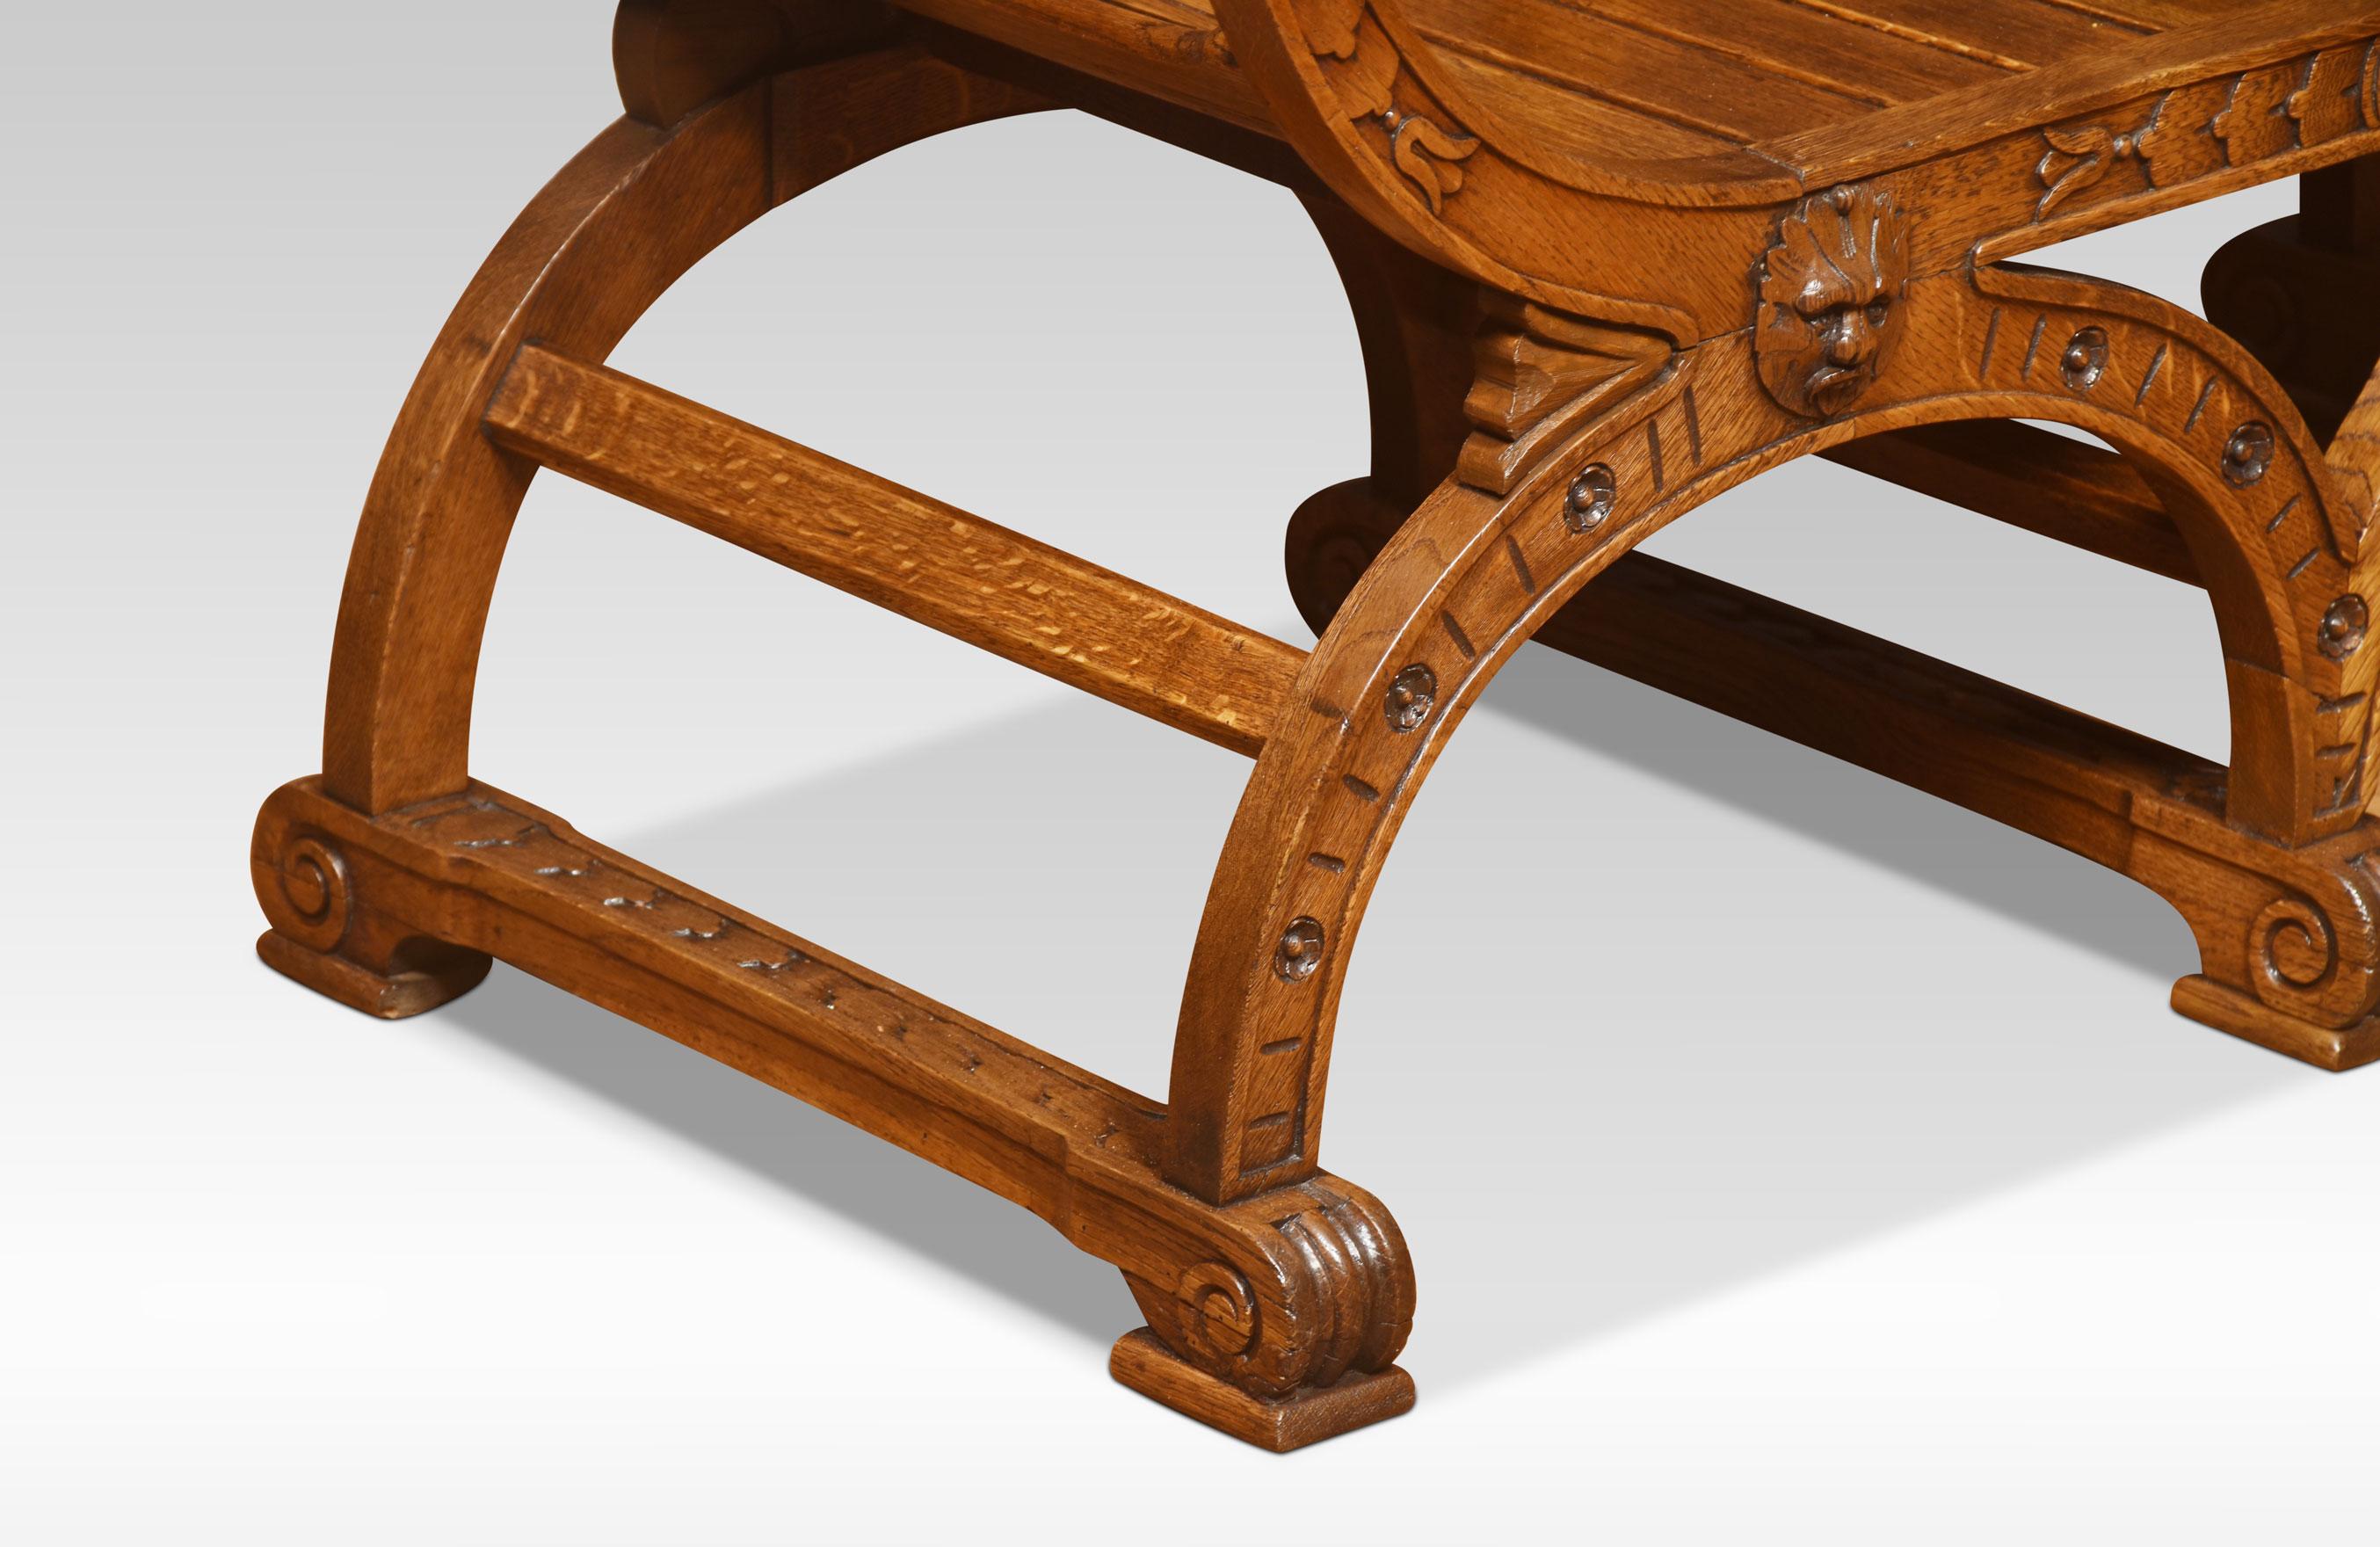 Oak bench the headed finials above carved backrests with scrolling details above planked seat surrounded by outswept arms. All raised up on shaped legs united by stretchers.\
Dimensions
Height 34.5 inches height to seat 15 inches
Width 44